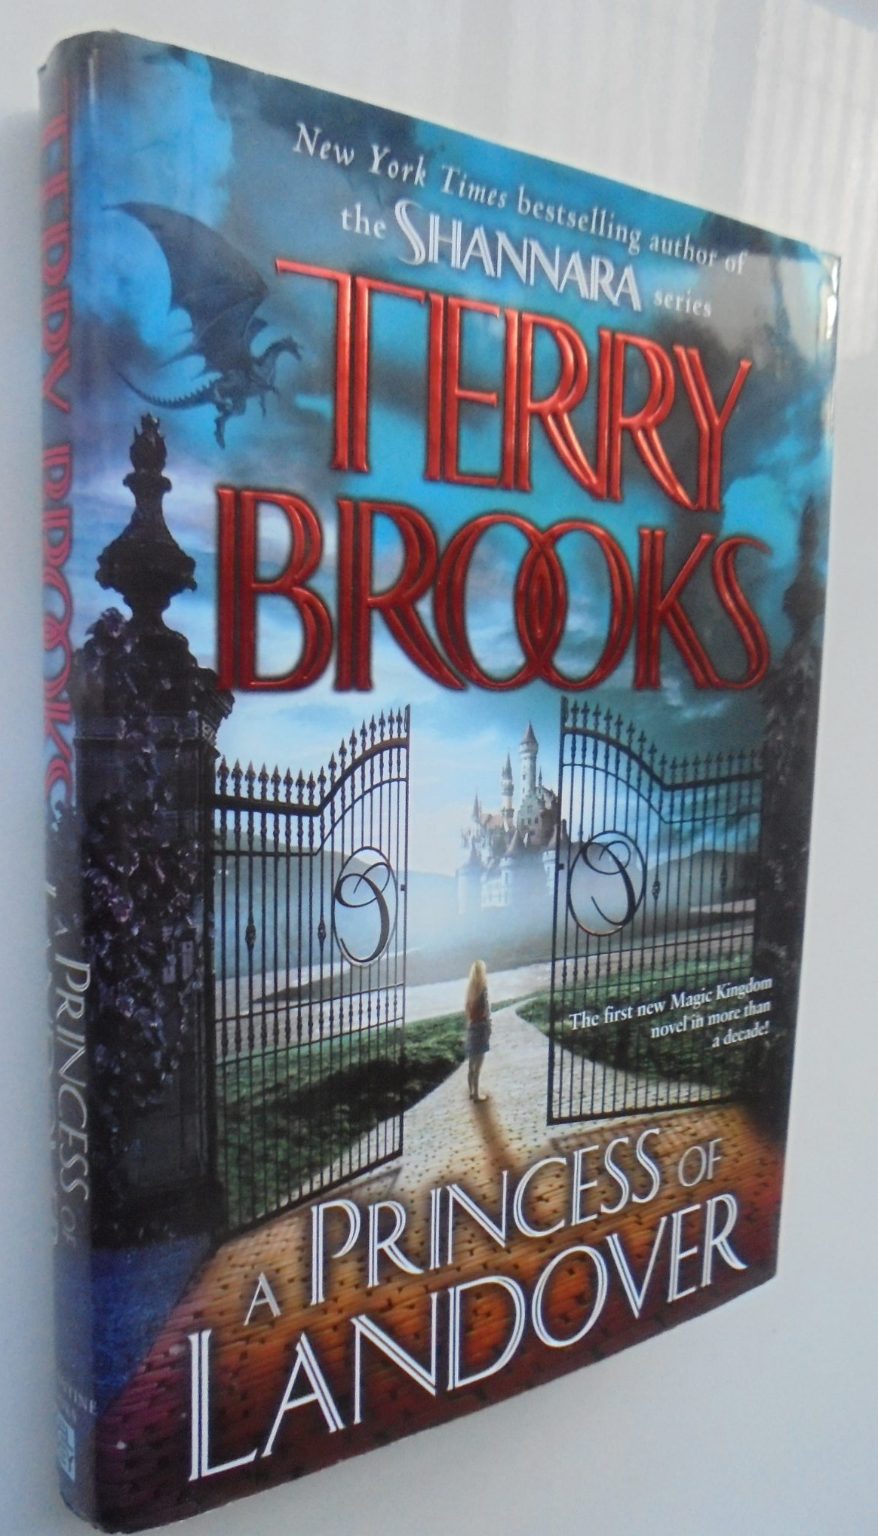 A Princess of Landover (Magic Kingdom of Landover, Book 6) by Terry Brooks. First Edition, first printing.